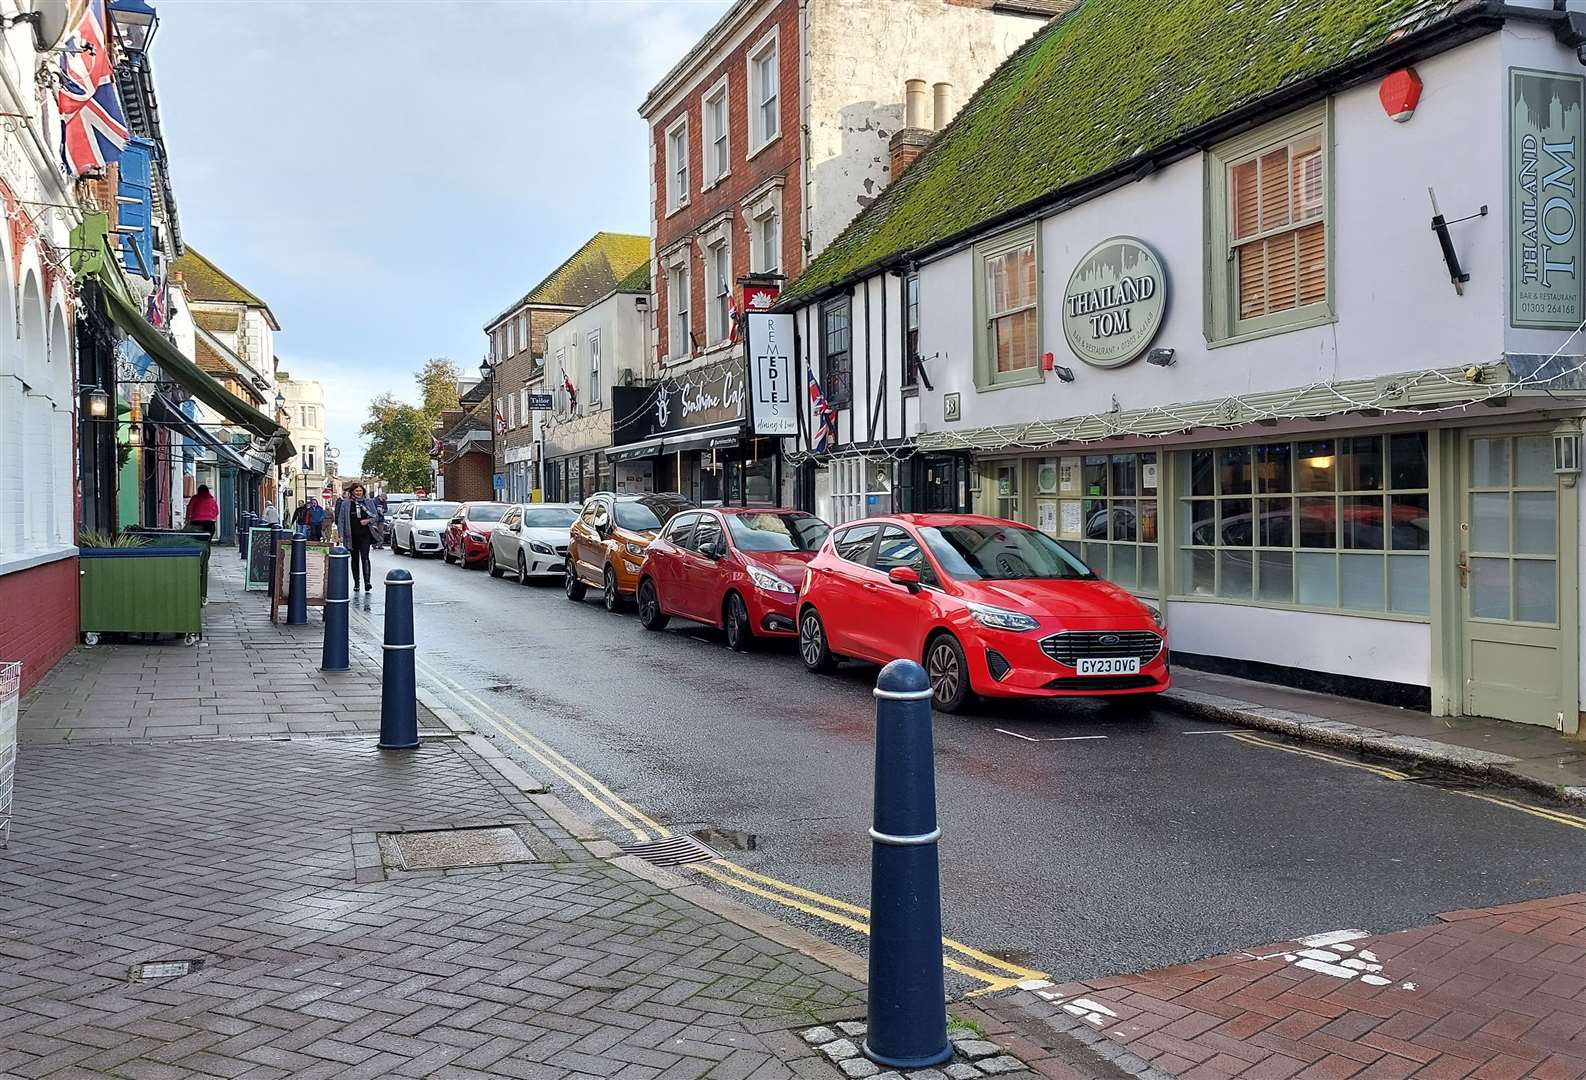 Concerns were raised over the impact the charges would have on Hythe high street